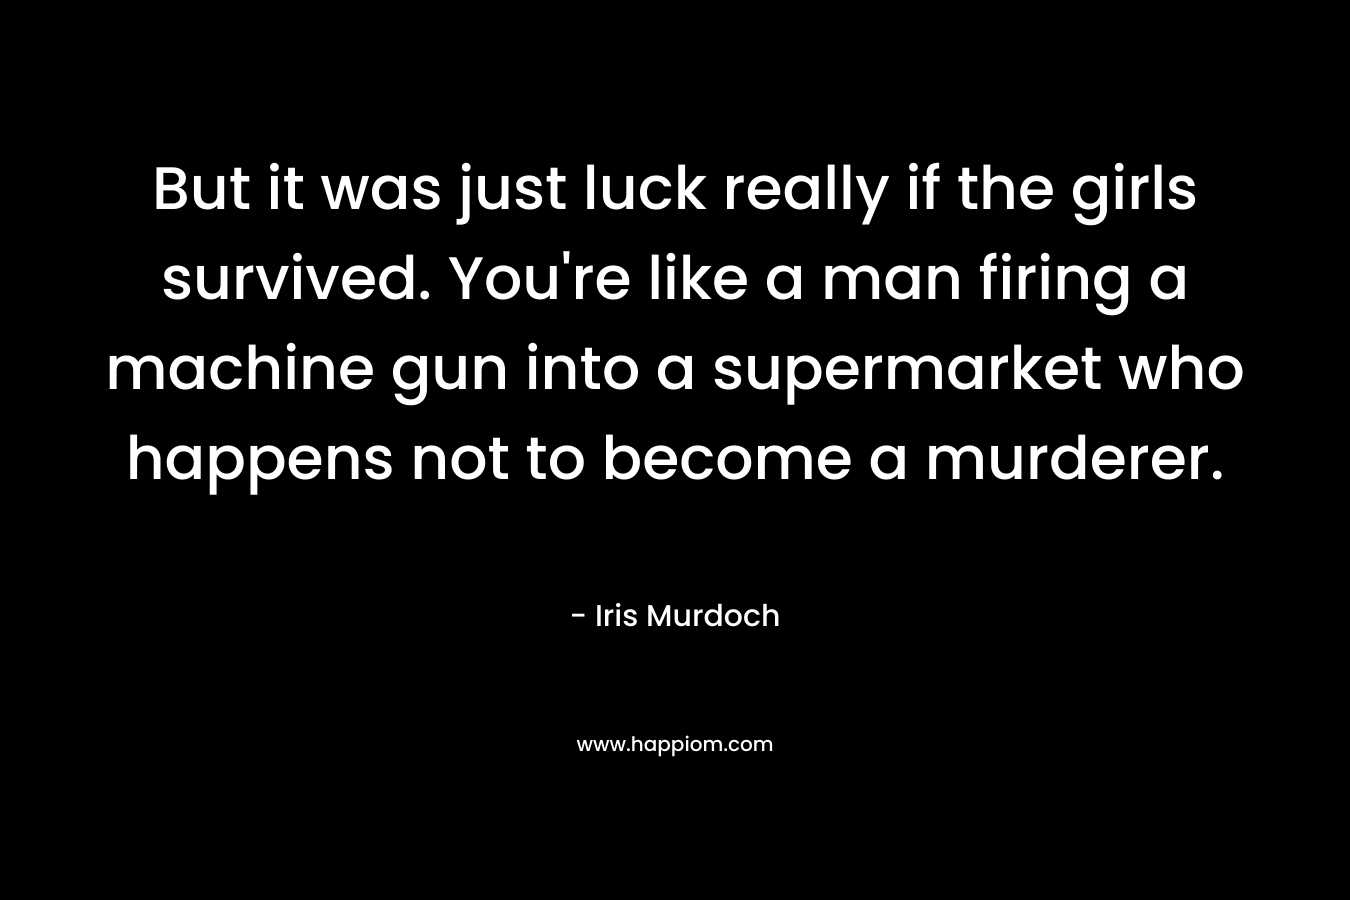 But it was just luck really if the girls survived. You’re like a man firing a machine gun into a supermarket who happens not to become a murderer. – Iris Murdoch